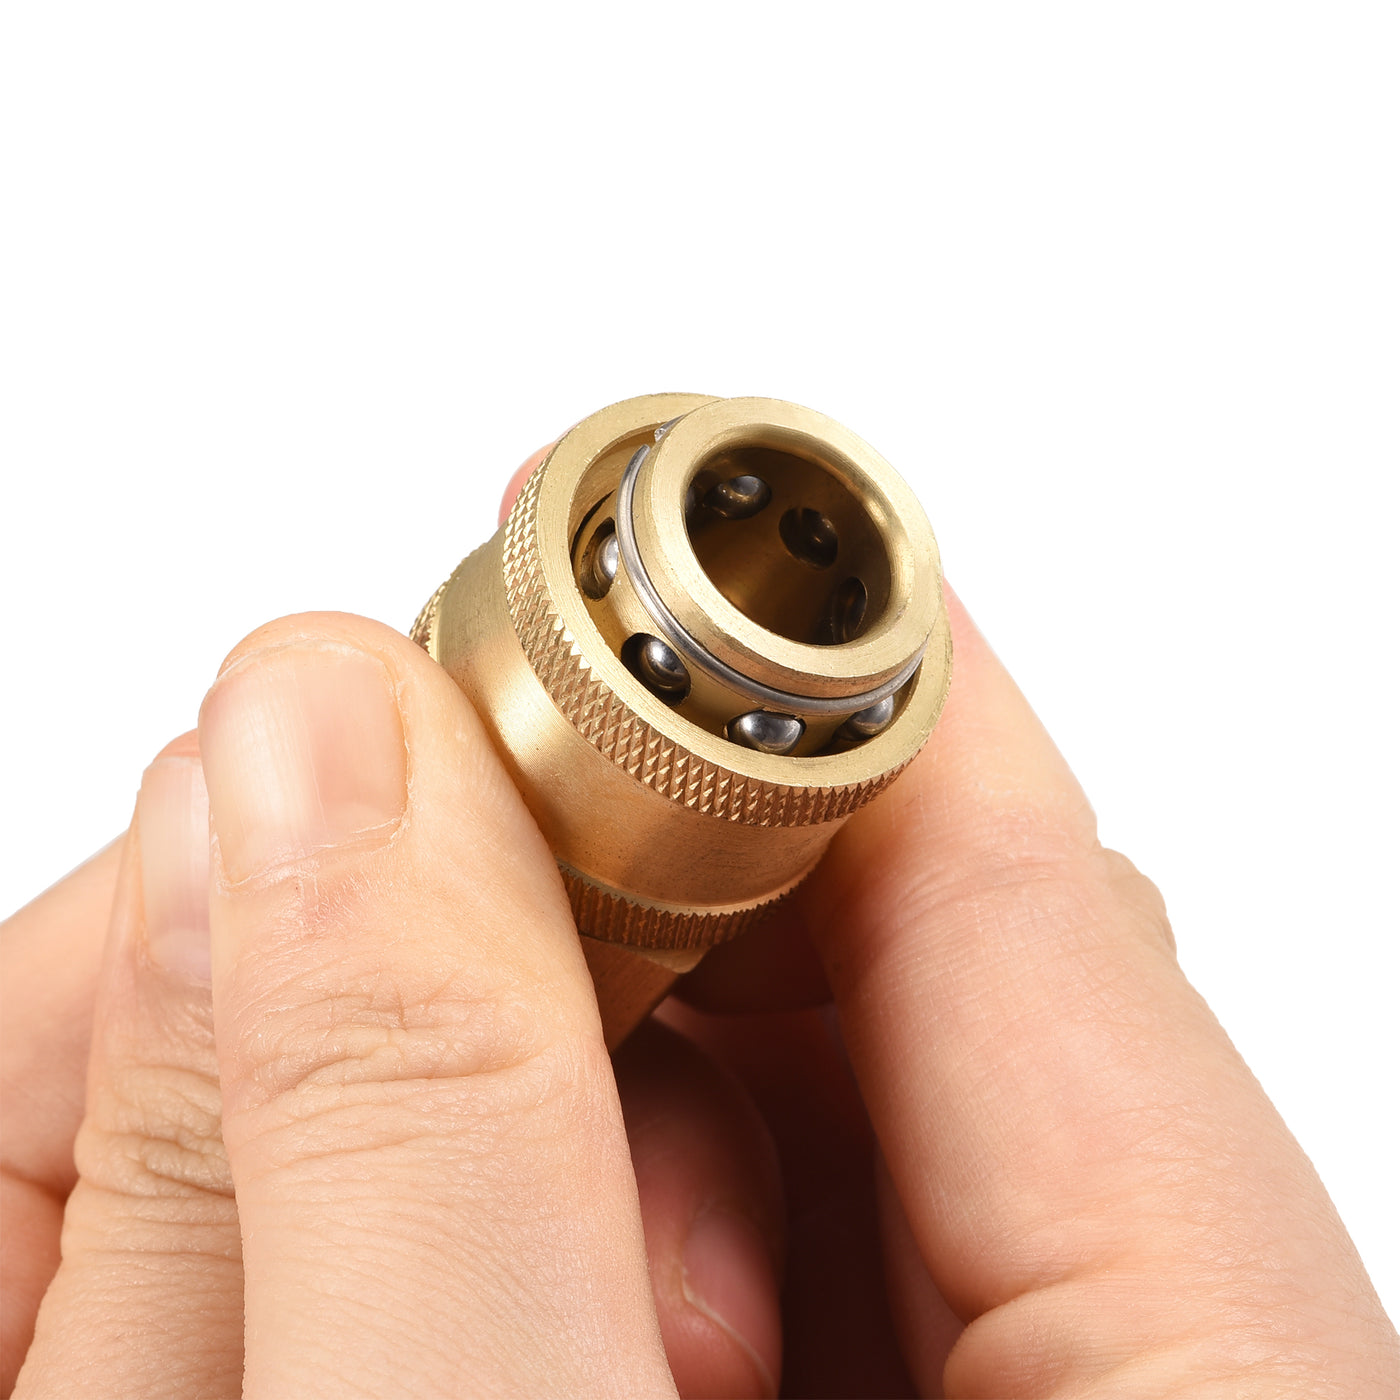 uxcell Uxcell Brass Quick Connector Set M22x1.5 & M14x1.5 Female Thread